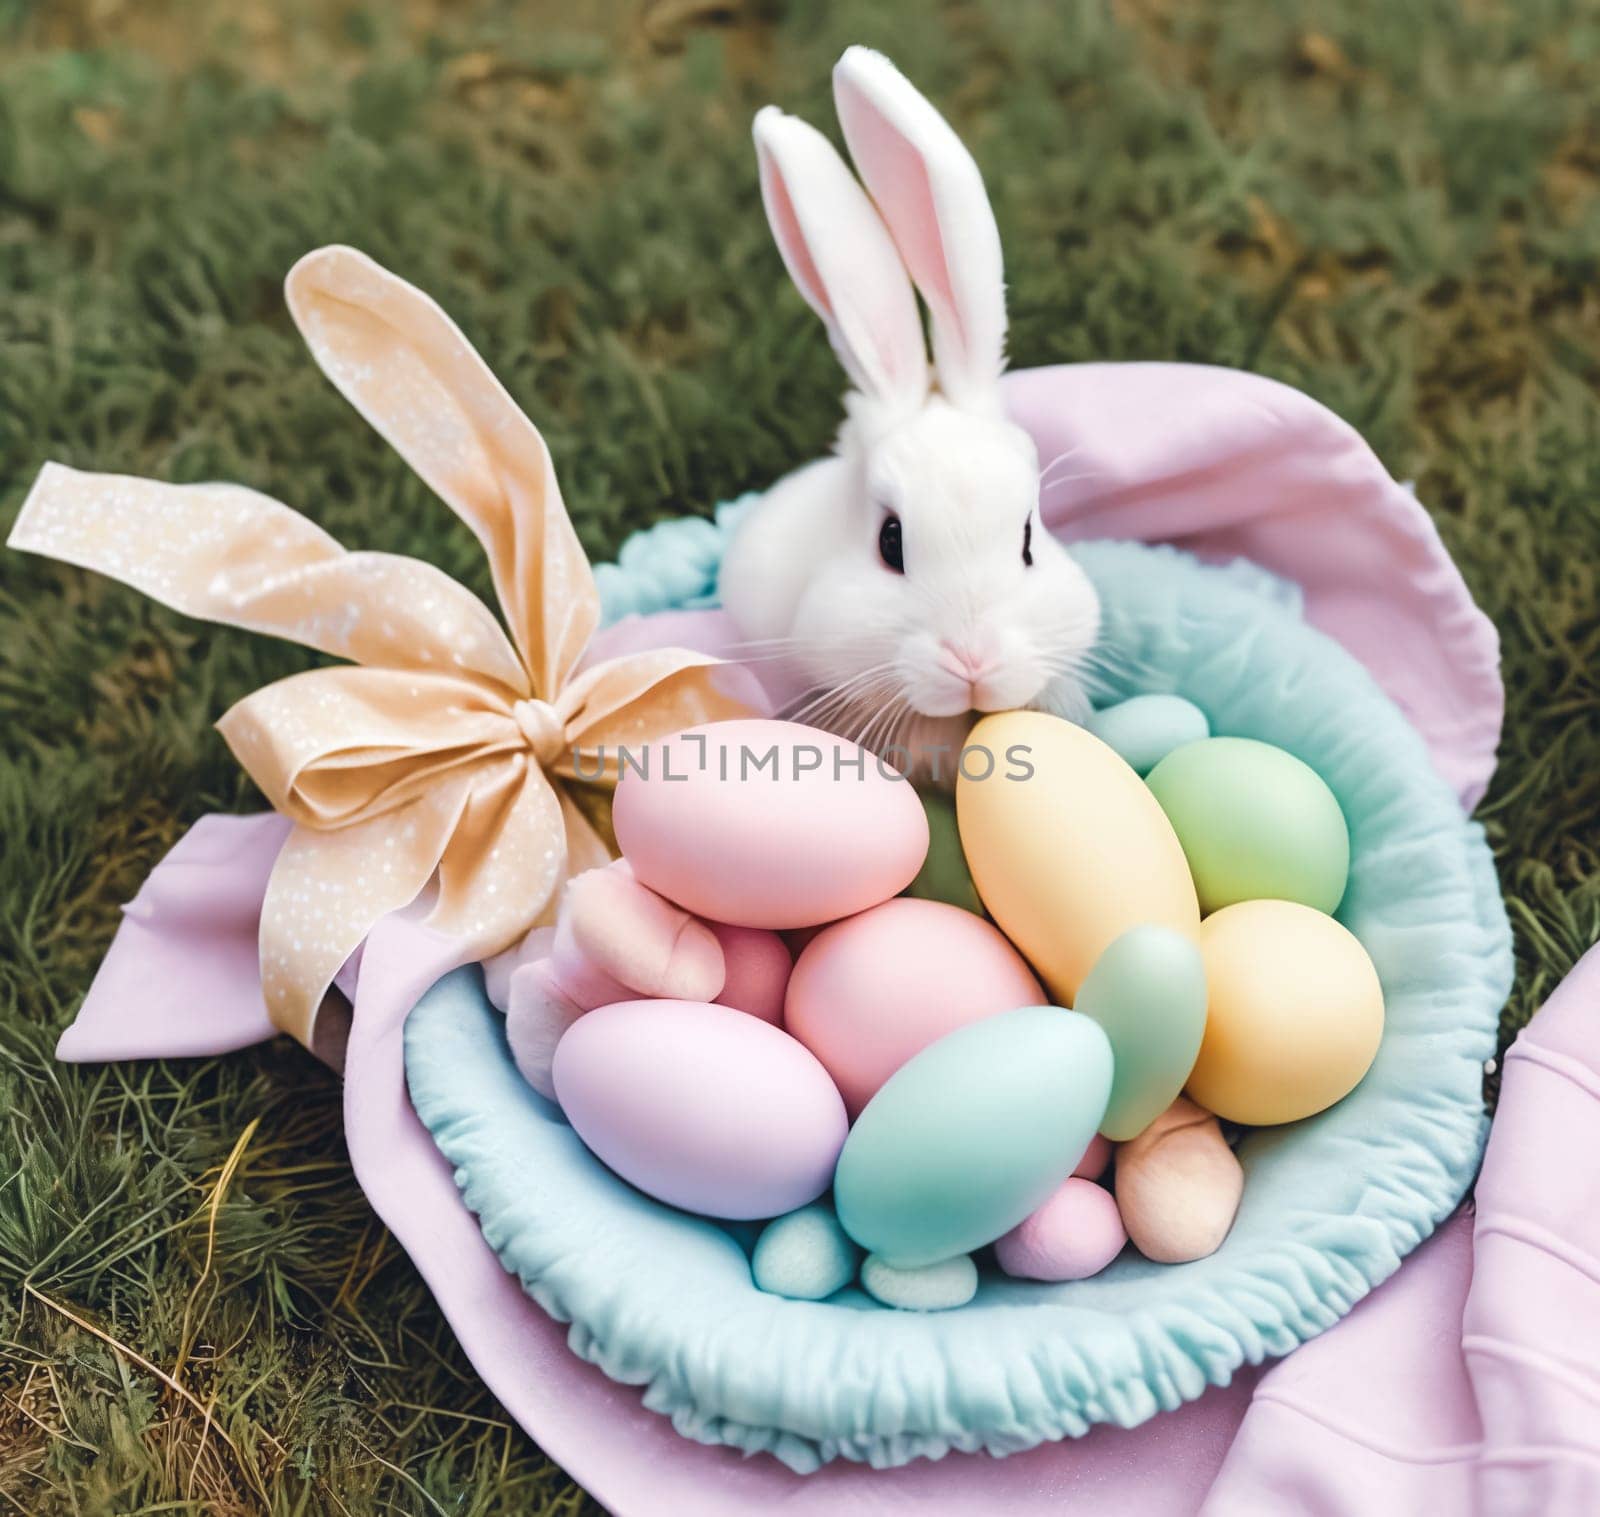 Adorable Bunny Decor. A charming arrangement of plush Easter bunny toys, pastel-colored ribbons, and decorative eggs displayed on a soft, fluffy surface like grass or a cozy blanket to evoke a sense of warmth and cuteness.